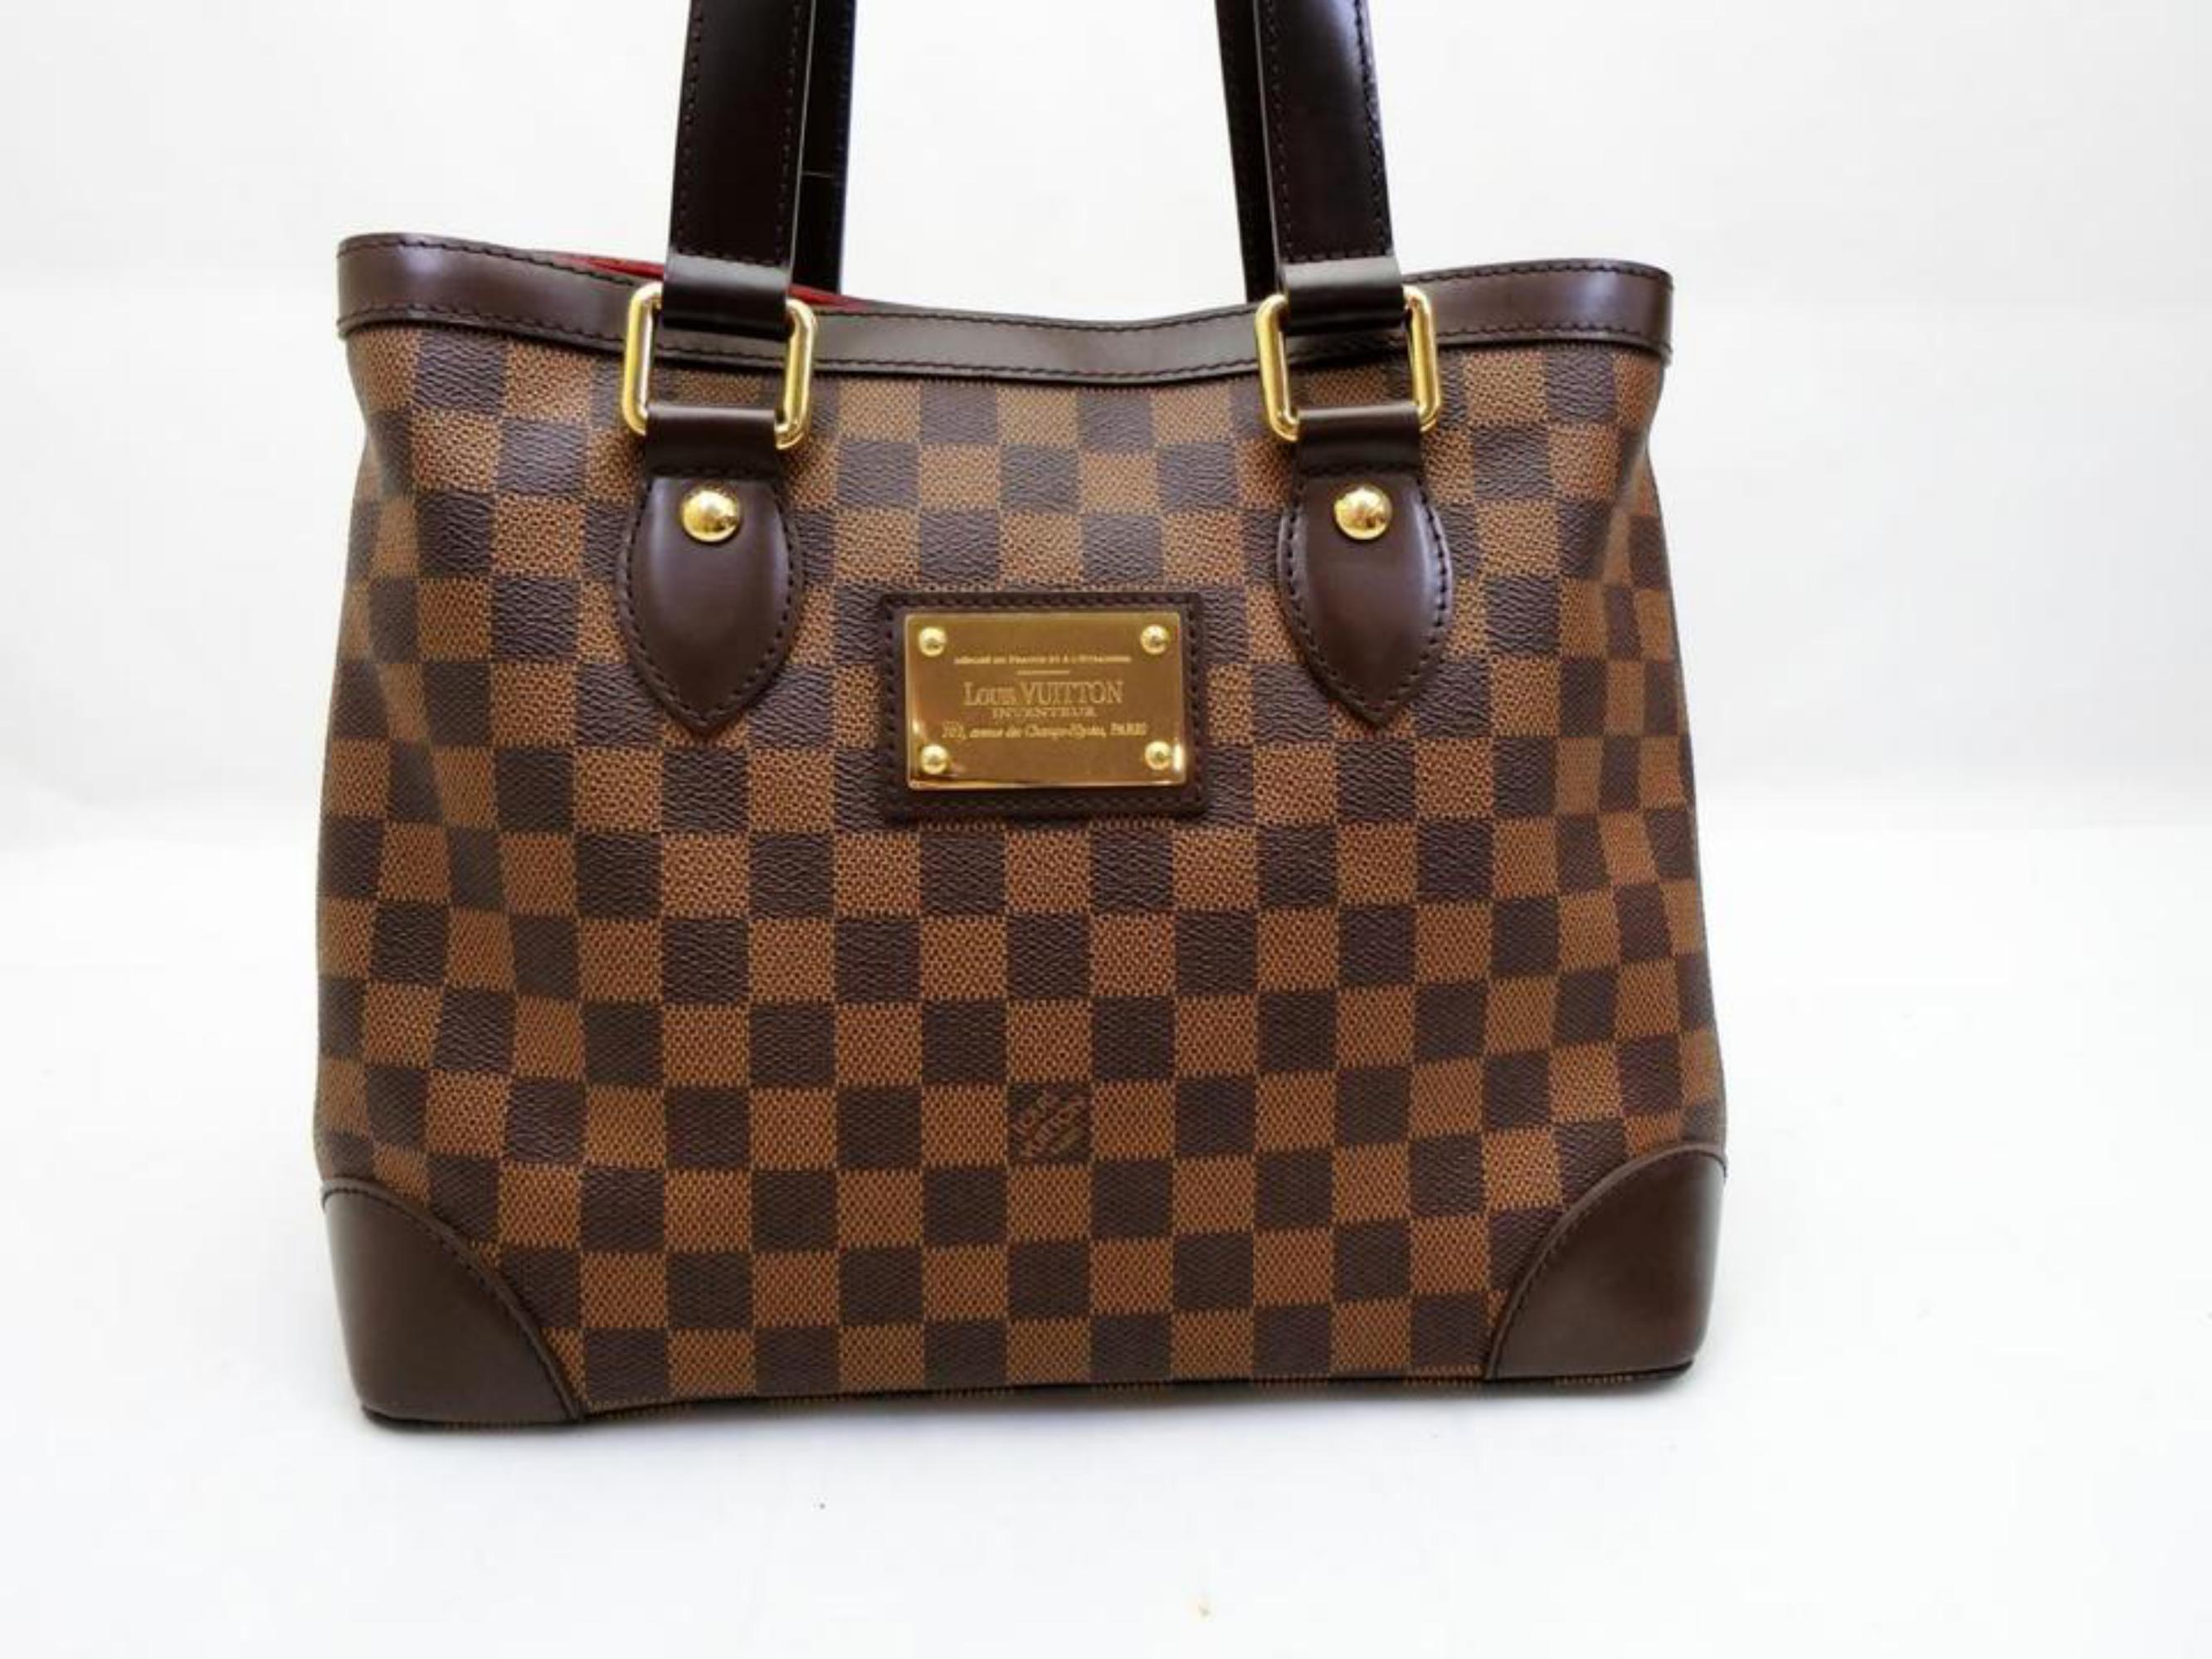 Louis Vuitton Hampstead Damier Ebene Pm 230090 Brown Coated Canvas Shoulder Bag In Excellent Condition For Sale In Forest Hills, NY